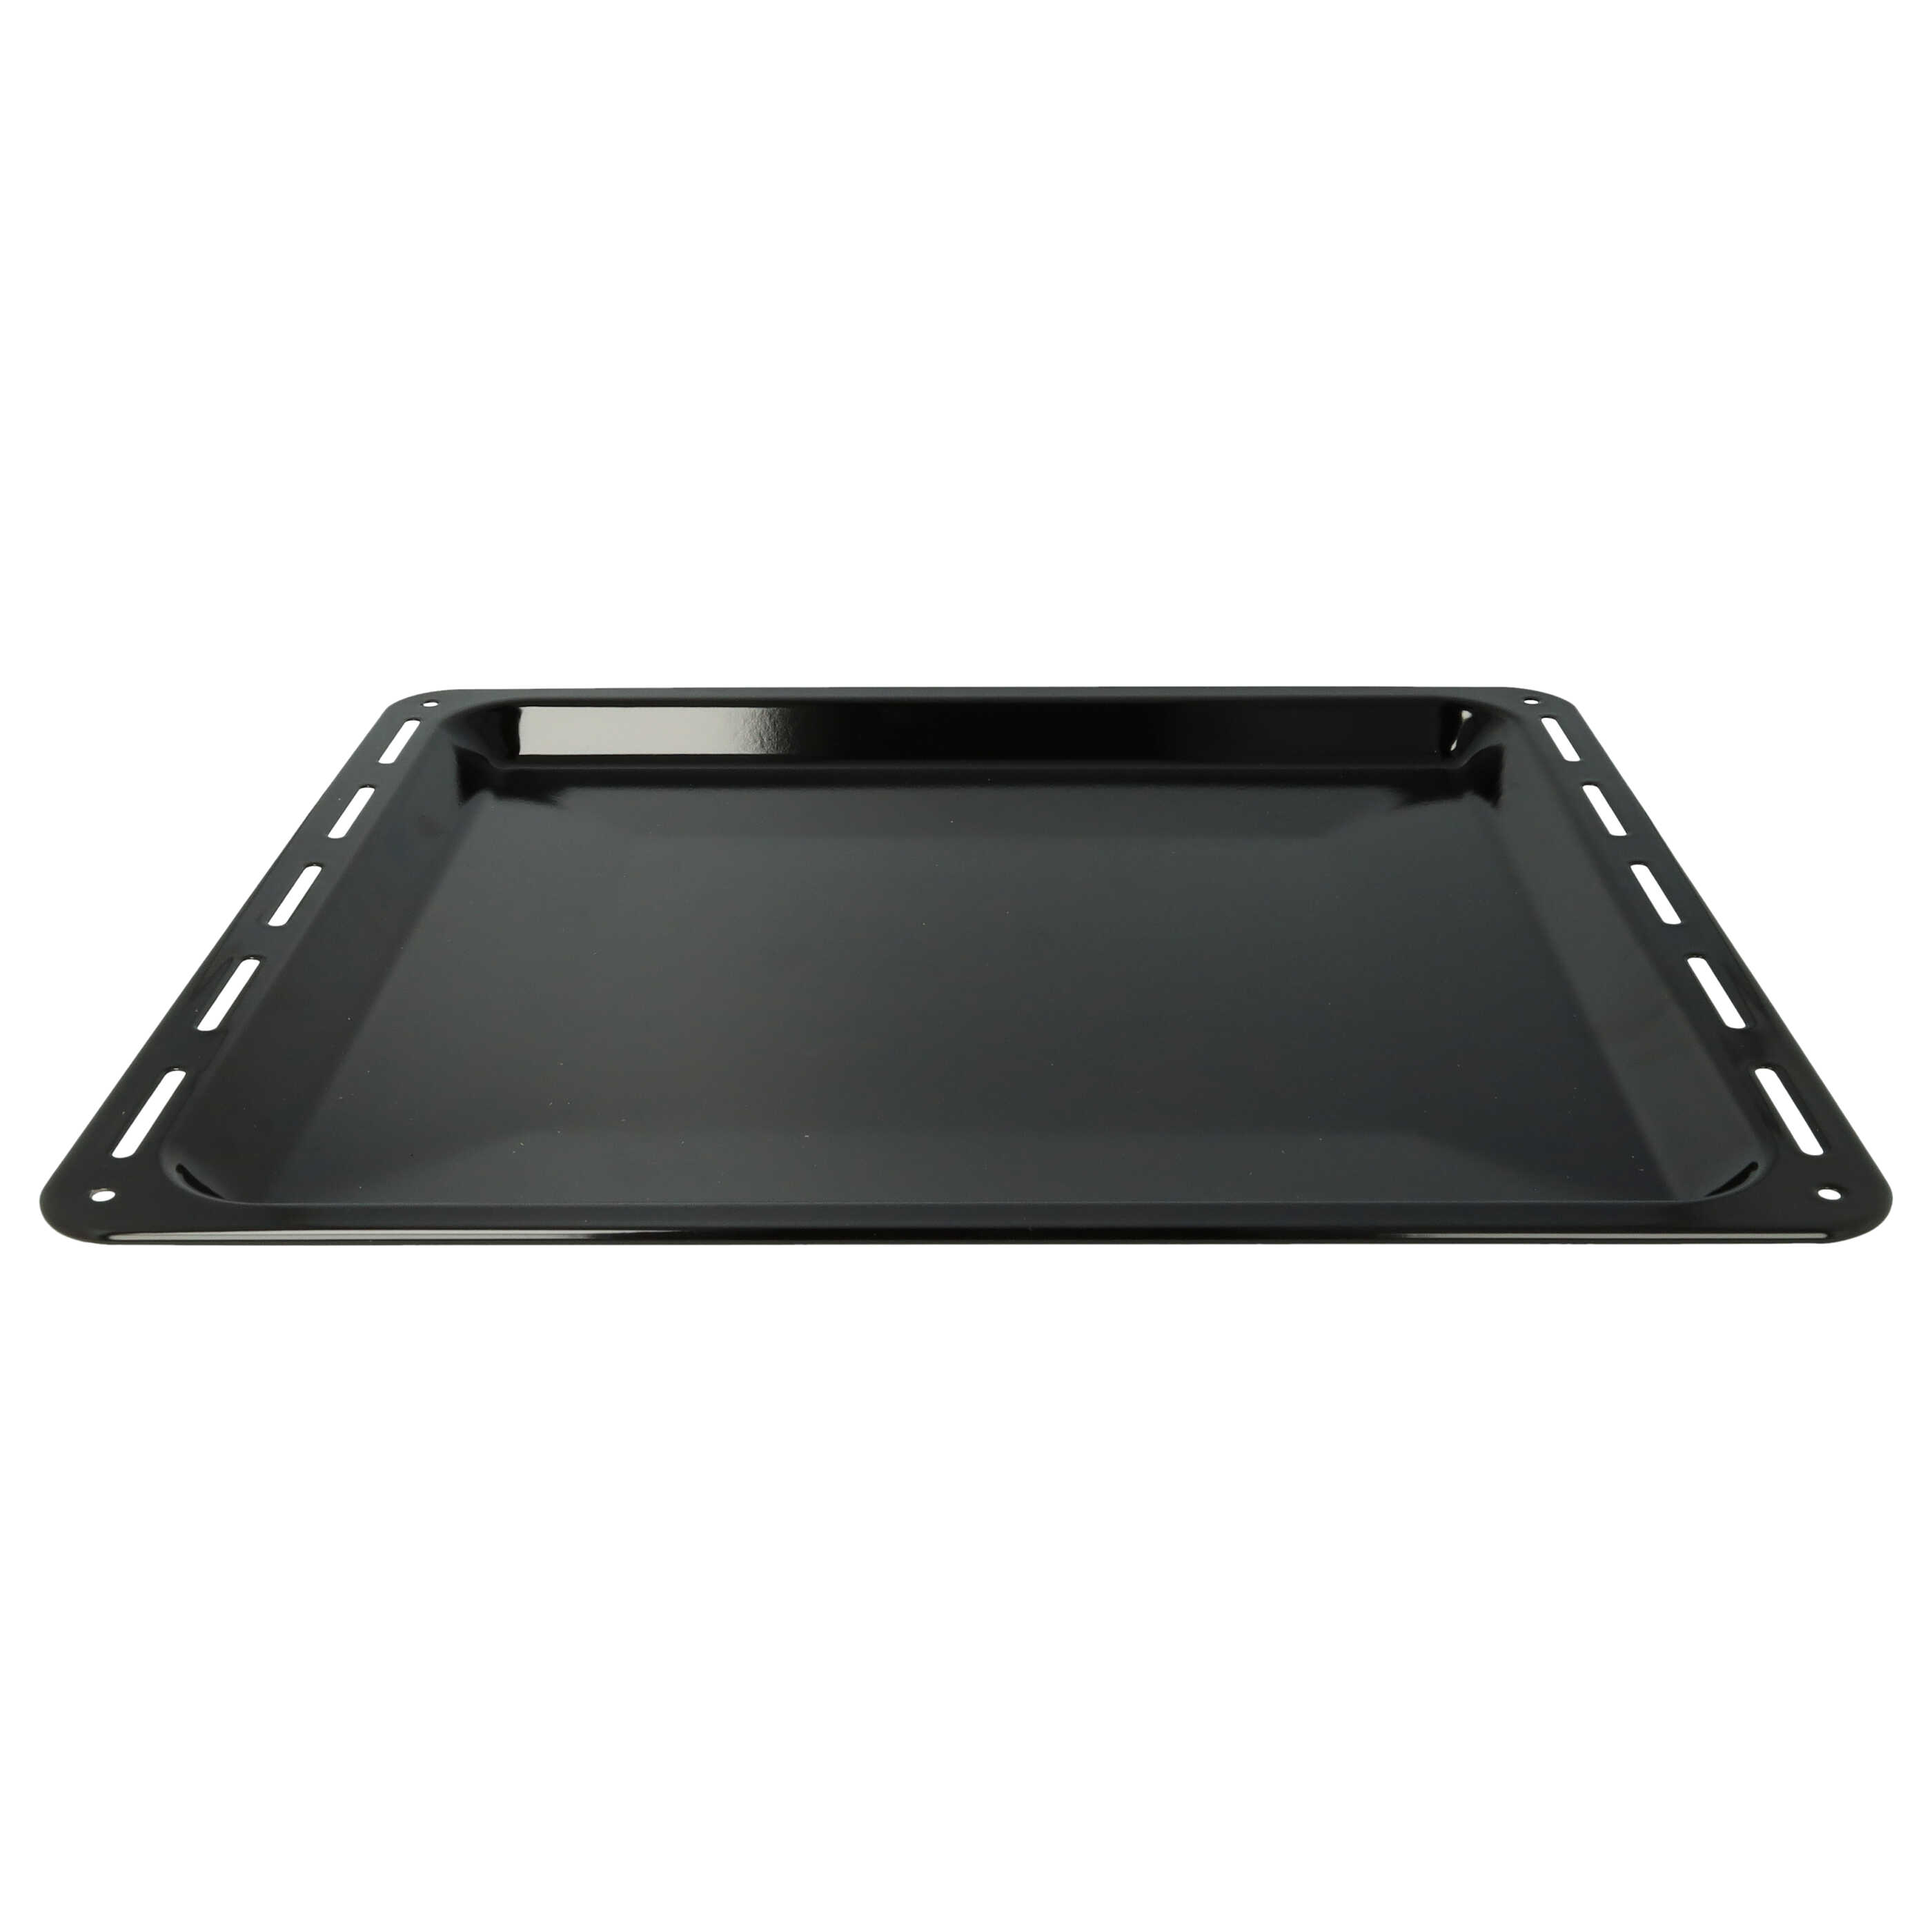 Baking Tray as Replacement for AEG 3423981020 Oven - 42.2 x 37.6 x 2 cm, Non-stick coating, Enamelled Black